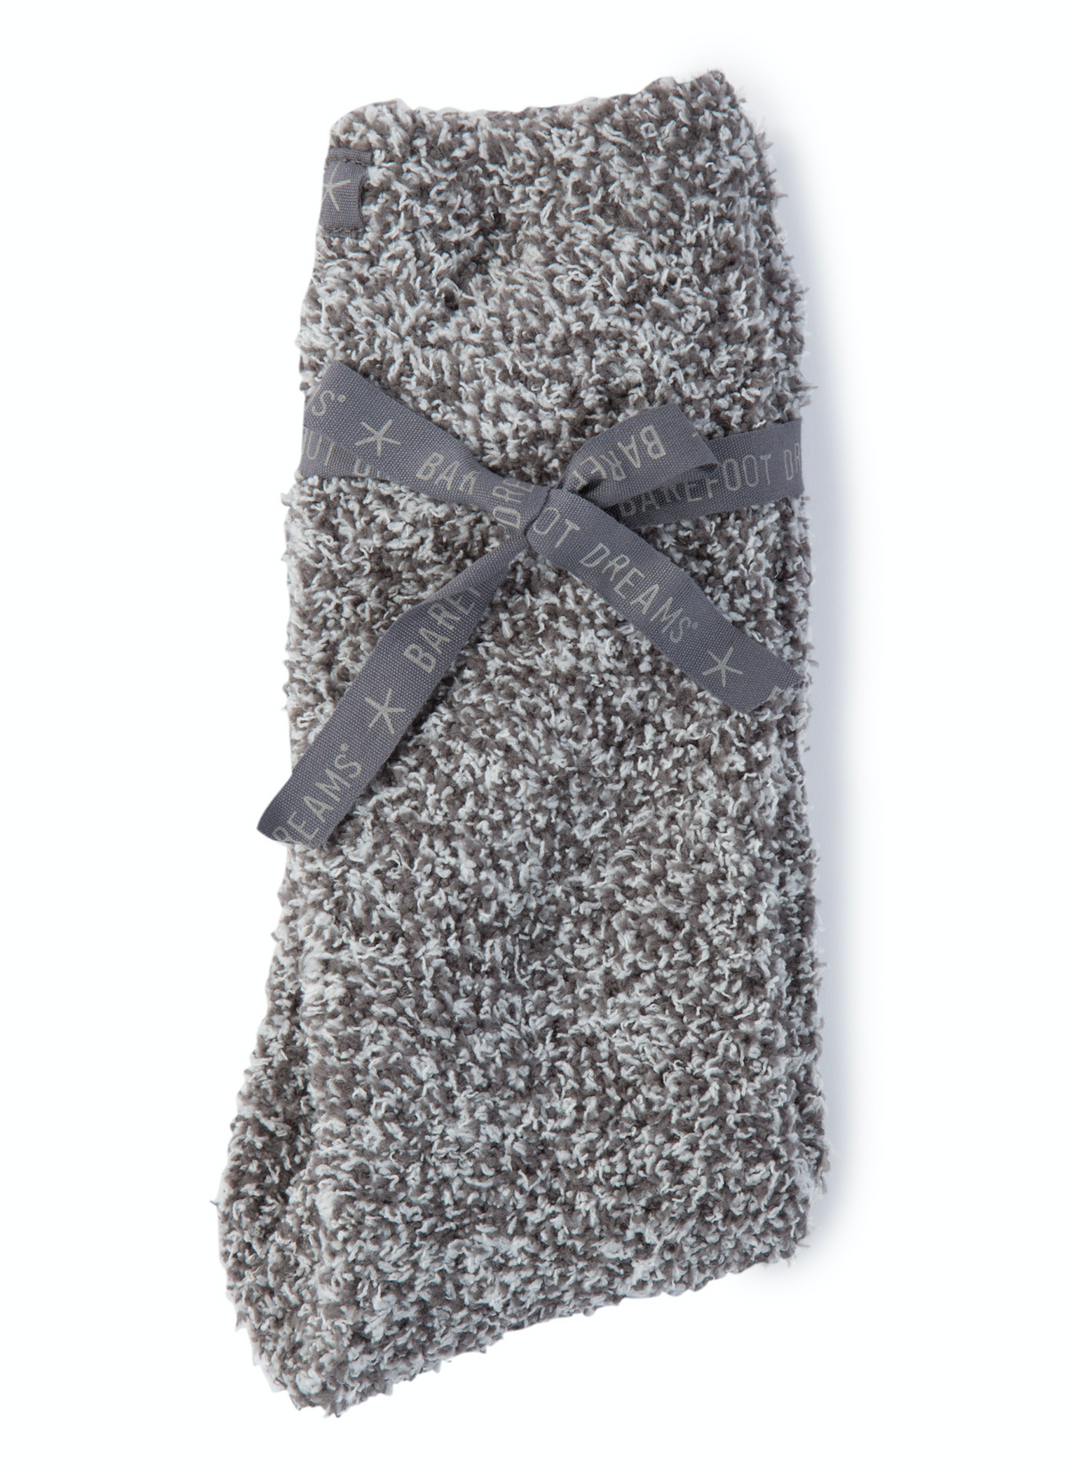 Barefoot Dreams Cozychic Heathered Socks in Oyster & White- Bliss